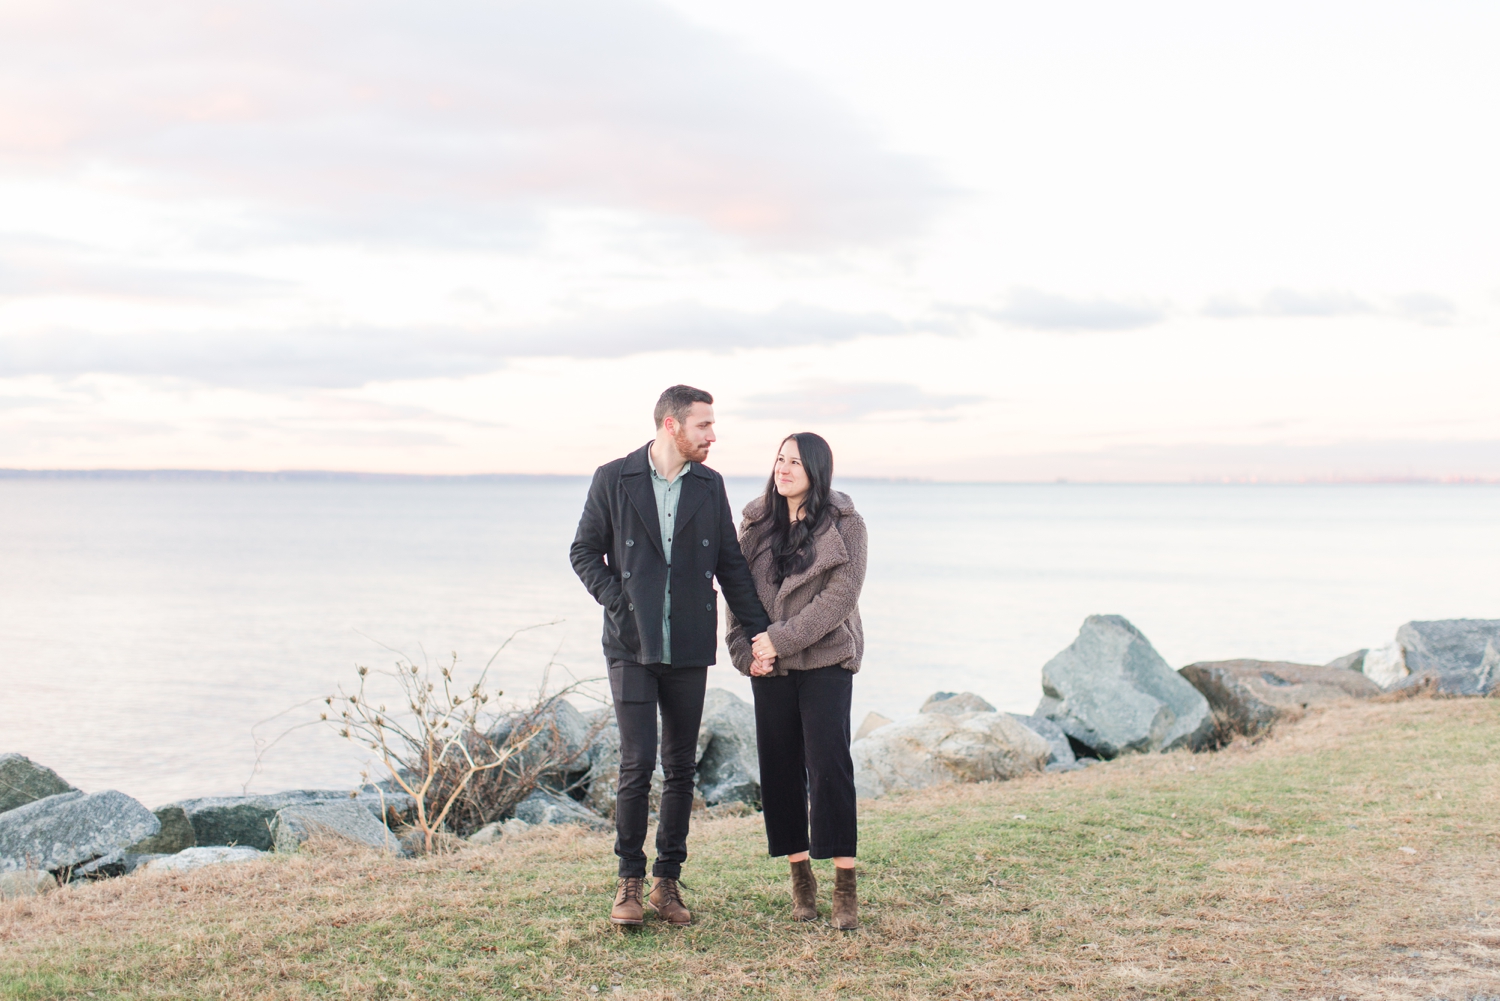 tods-point-engagement-session-greenwich-connecticut-wedding-photographer-shaina-lee-photography-photo